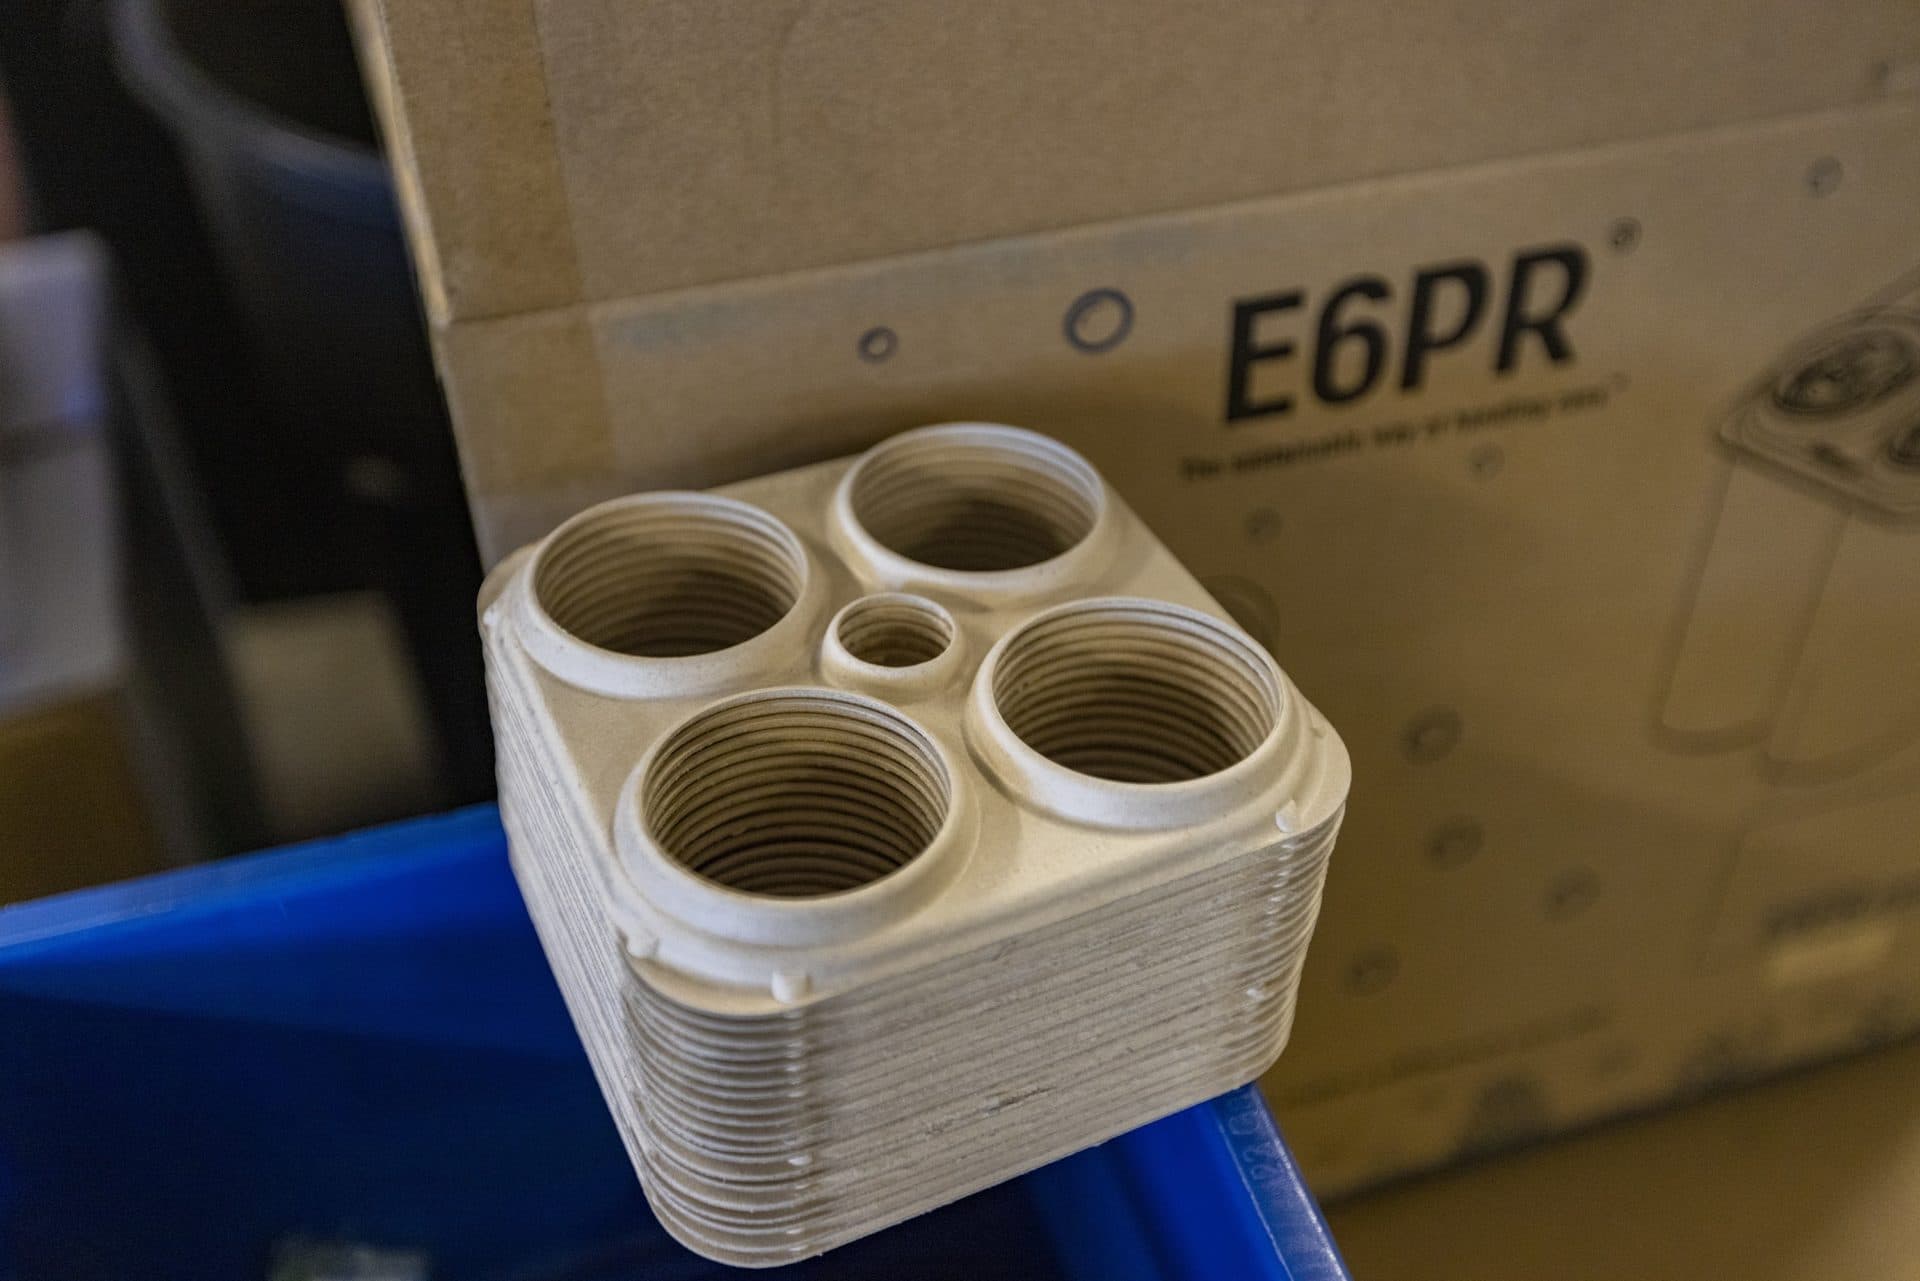 A stack og E6PR beer carrier rings is the first eco-friendly six-pack ring made from fiber by-product waste, designed to replace plastic rings many craft breweries are currently using to package their beer. (Jesse Costa/WBUR)